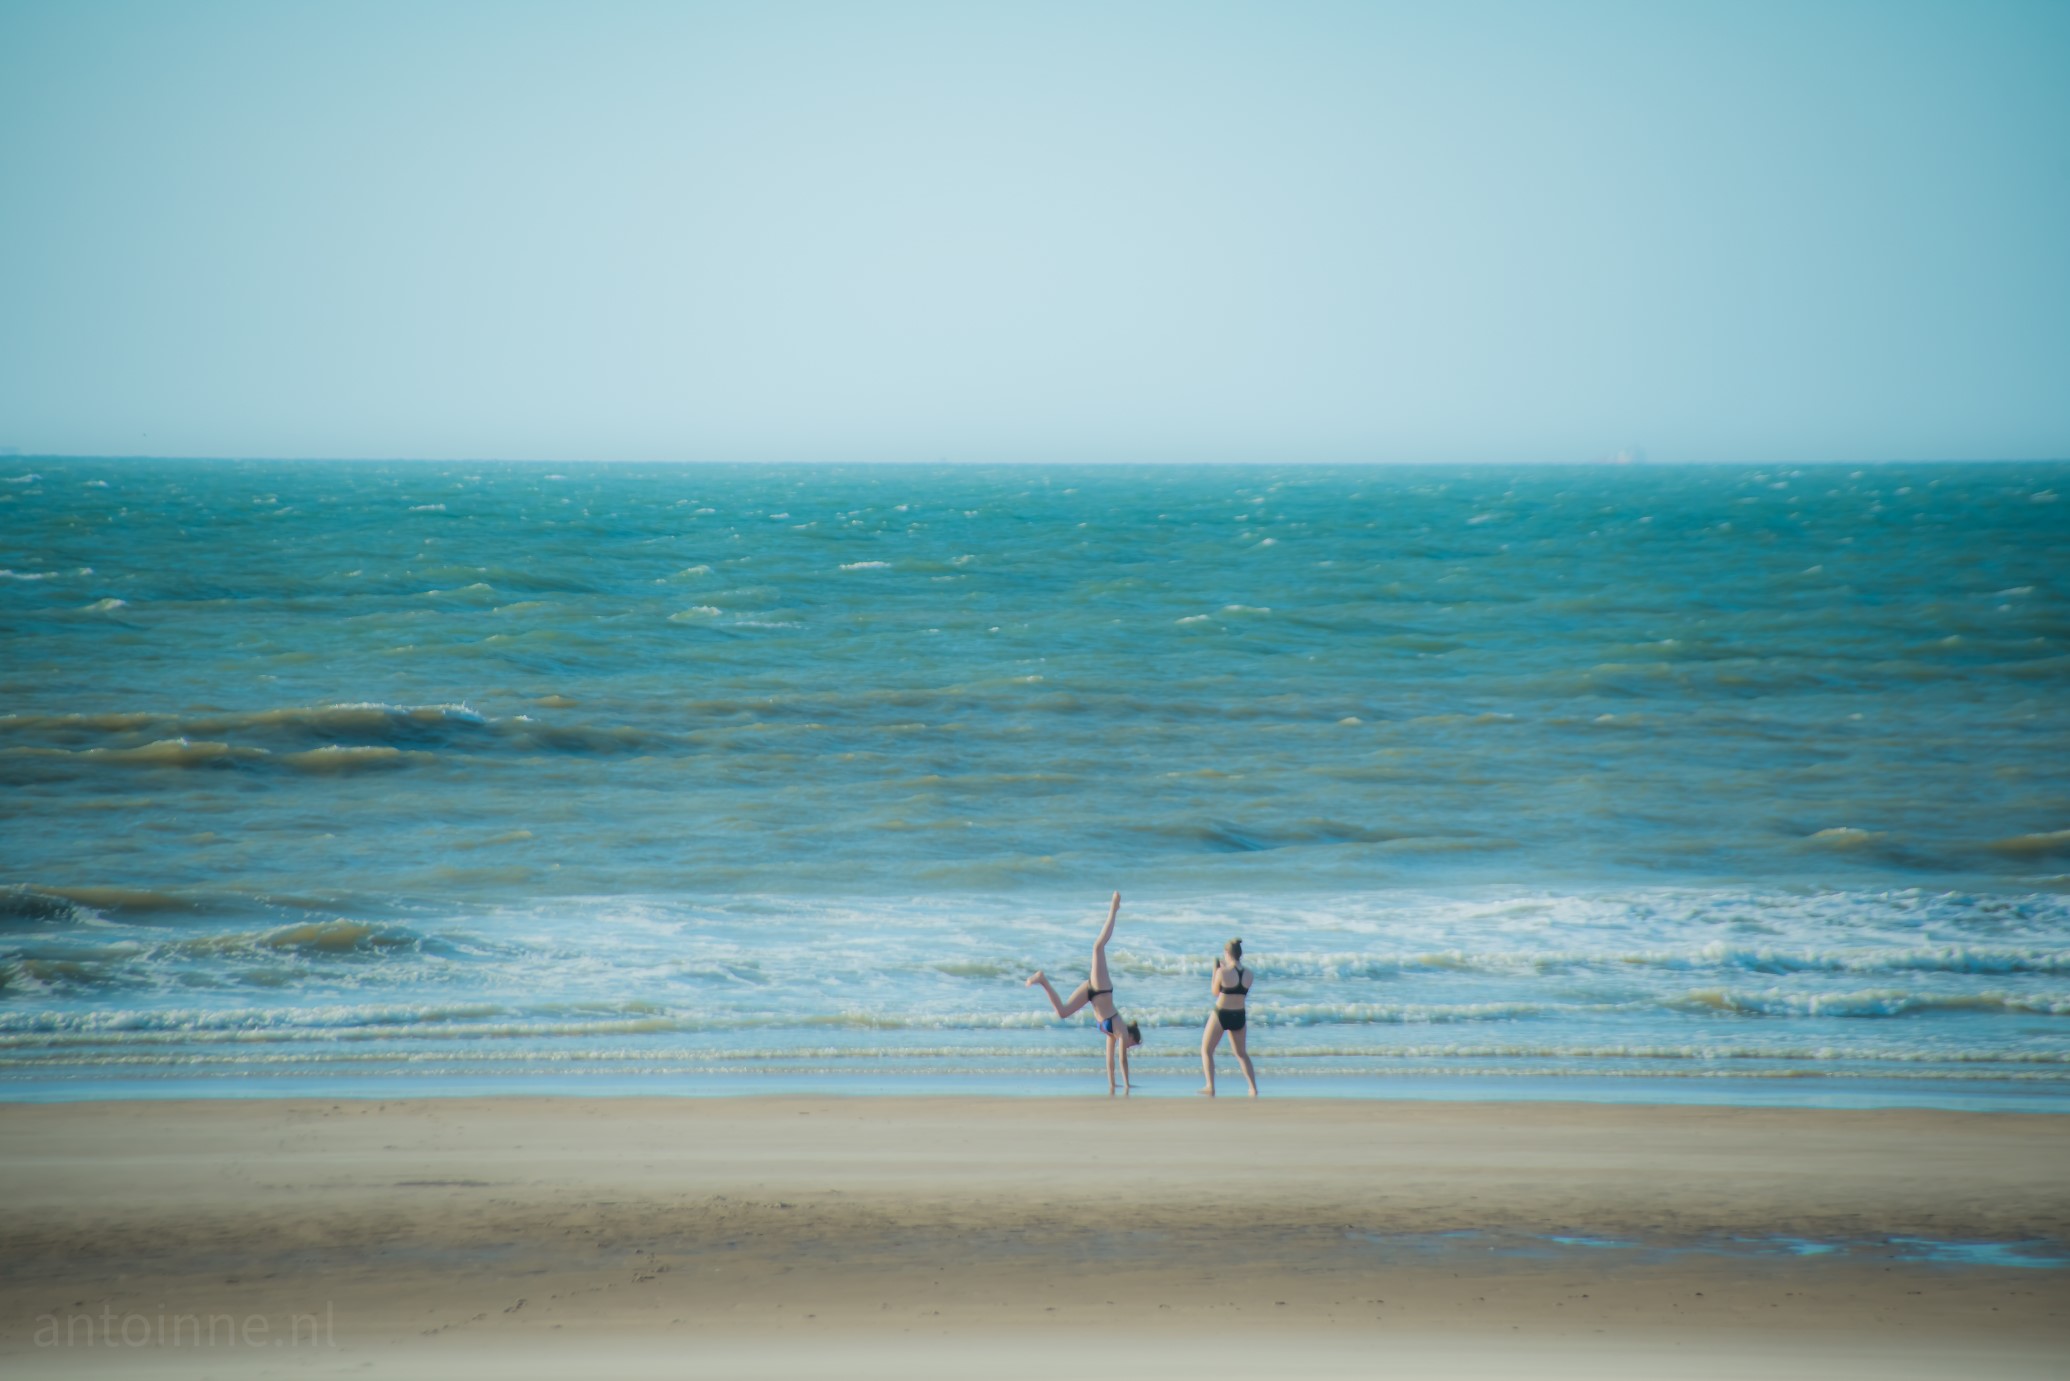 Two girls on the beach. One is doing cartwheels while the other takes pictures.